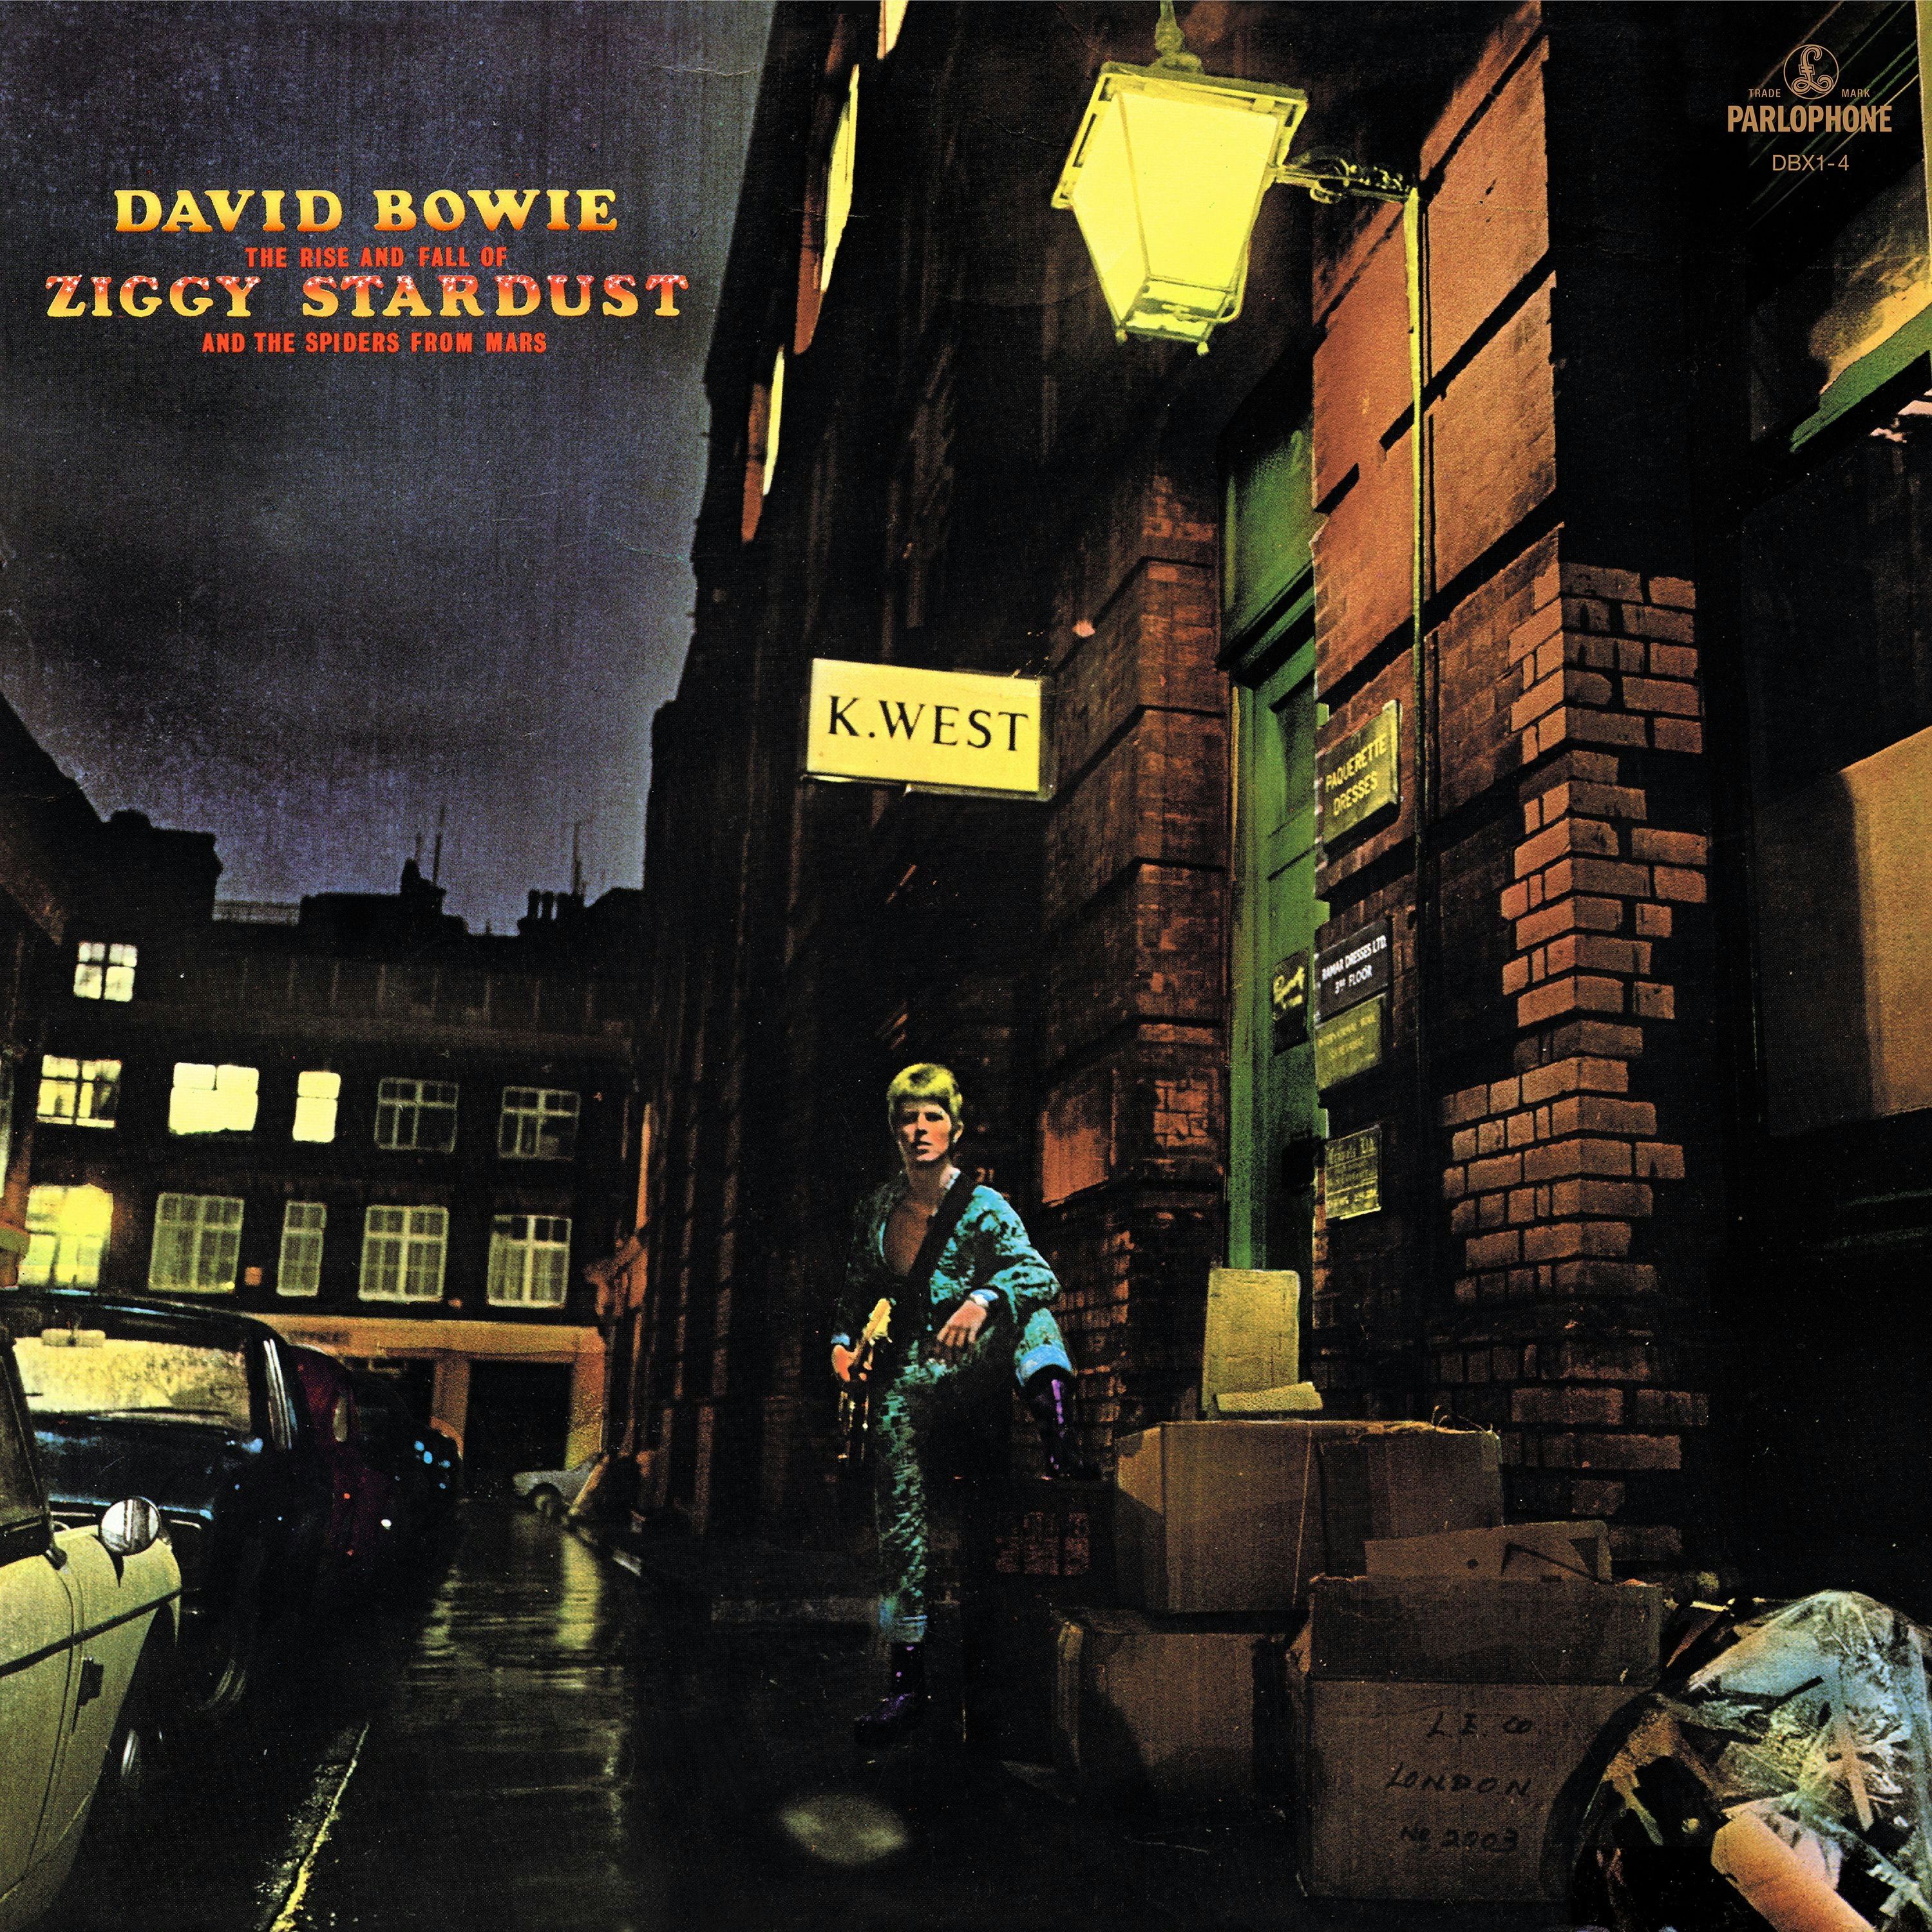 Album artwork for Album artwork for The Rise and Fall of Ziggy Stardust and the Spiders From Mars by David Bowie by The Rise and Fall of Ziggy Stardust and the Spiders From Mars - David Bowie